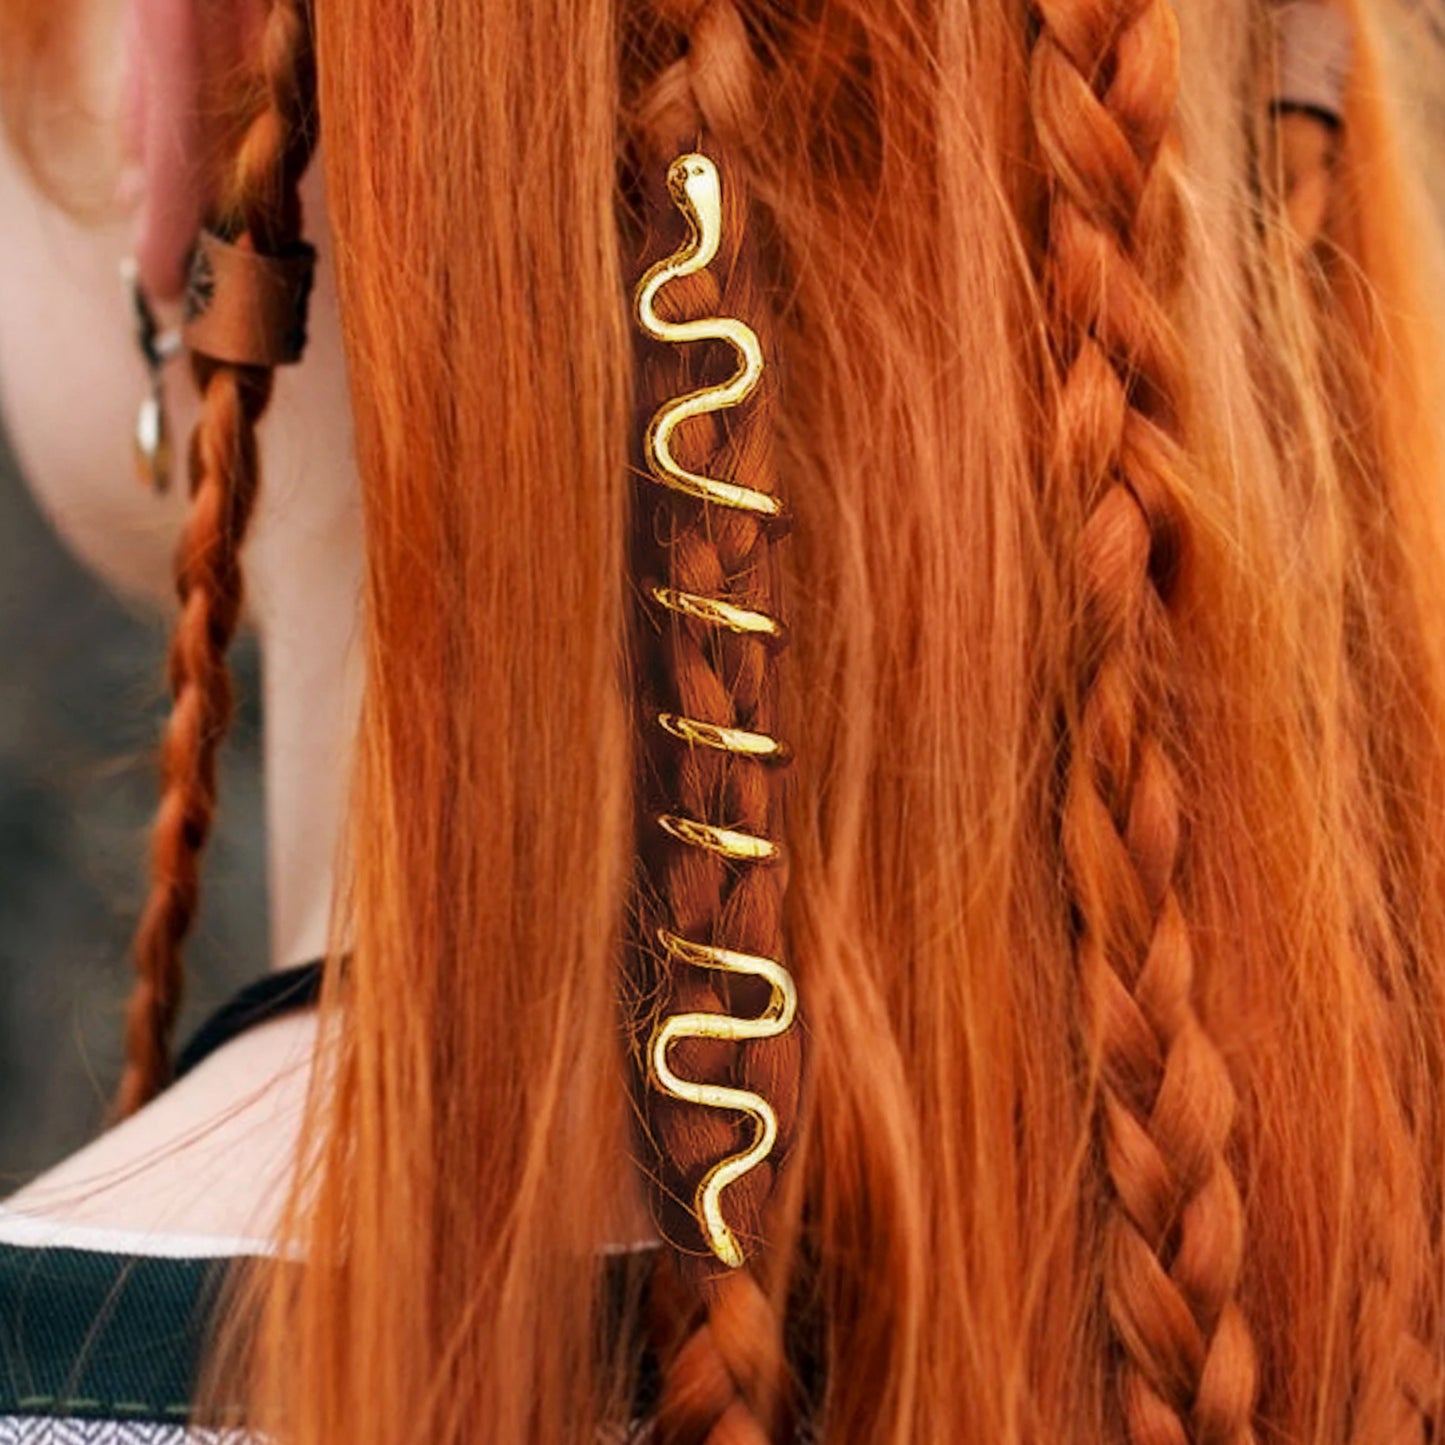 An image of a model with long red hair, partially in braids. Small bronze hair cuffs, shaped like snakes, are interwoven into her braids.